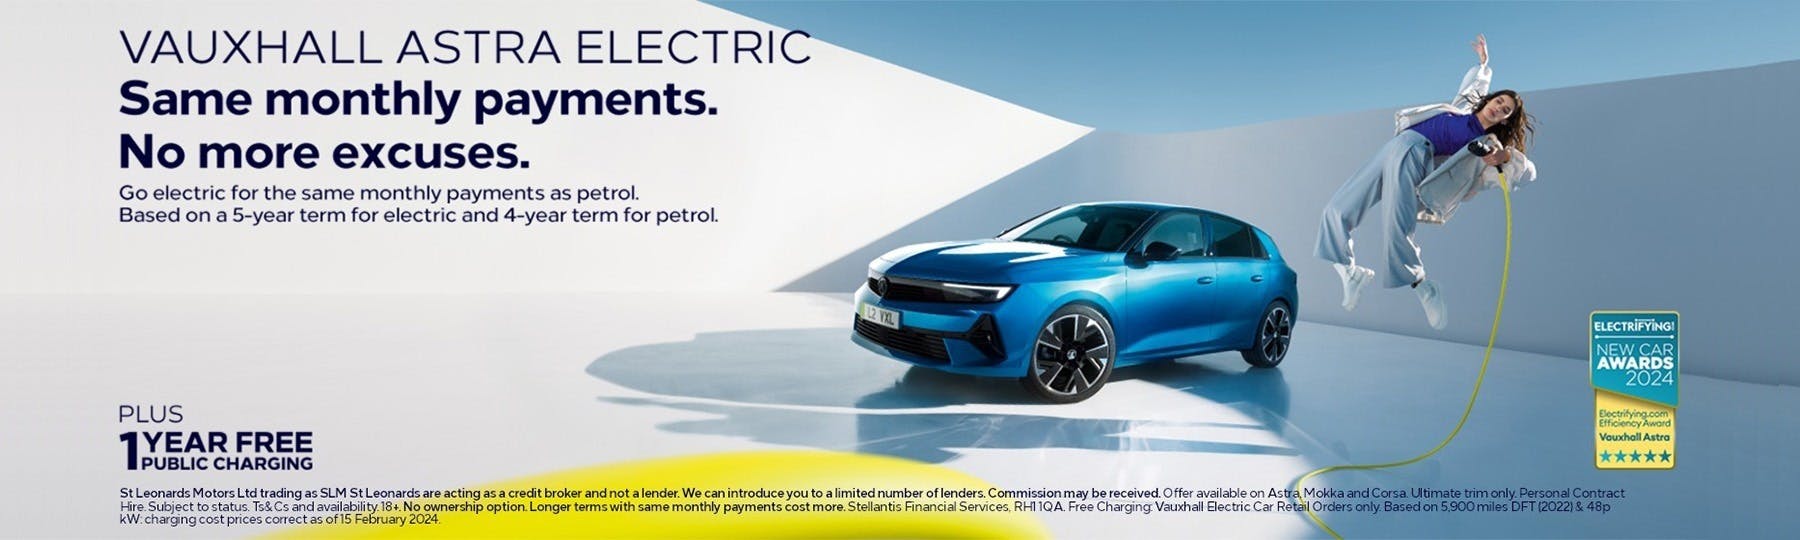 Vauxhall Astra Electric New Car Offer